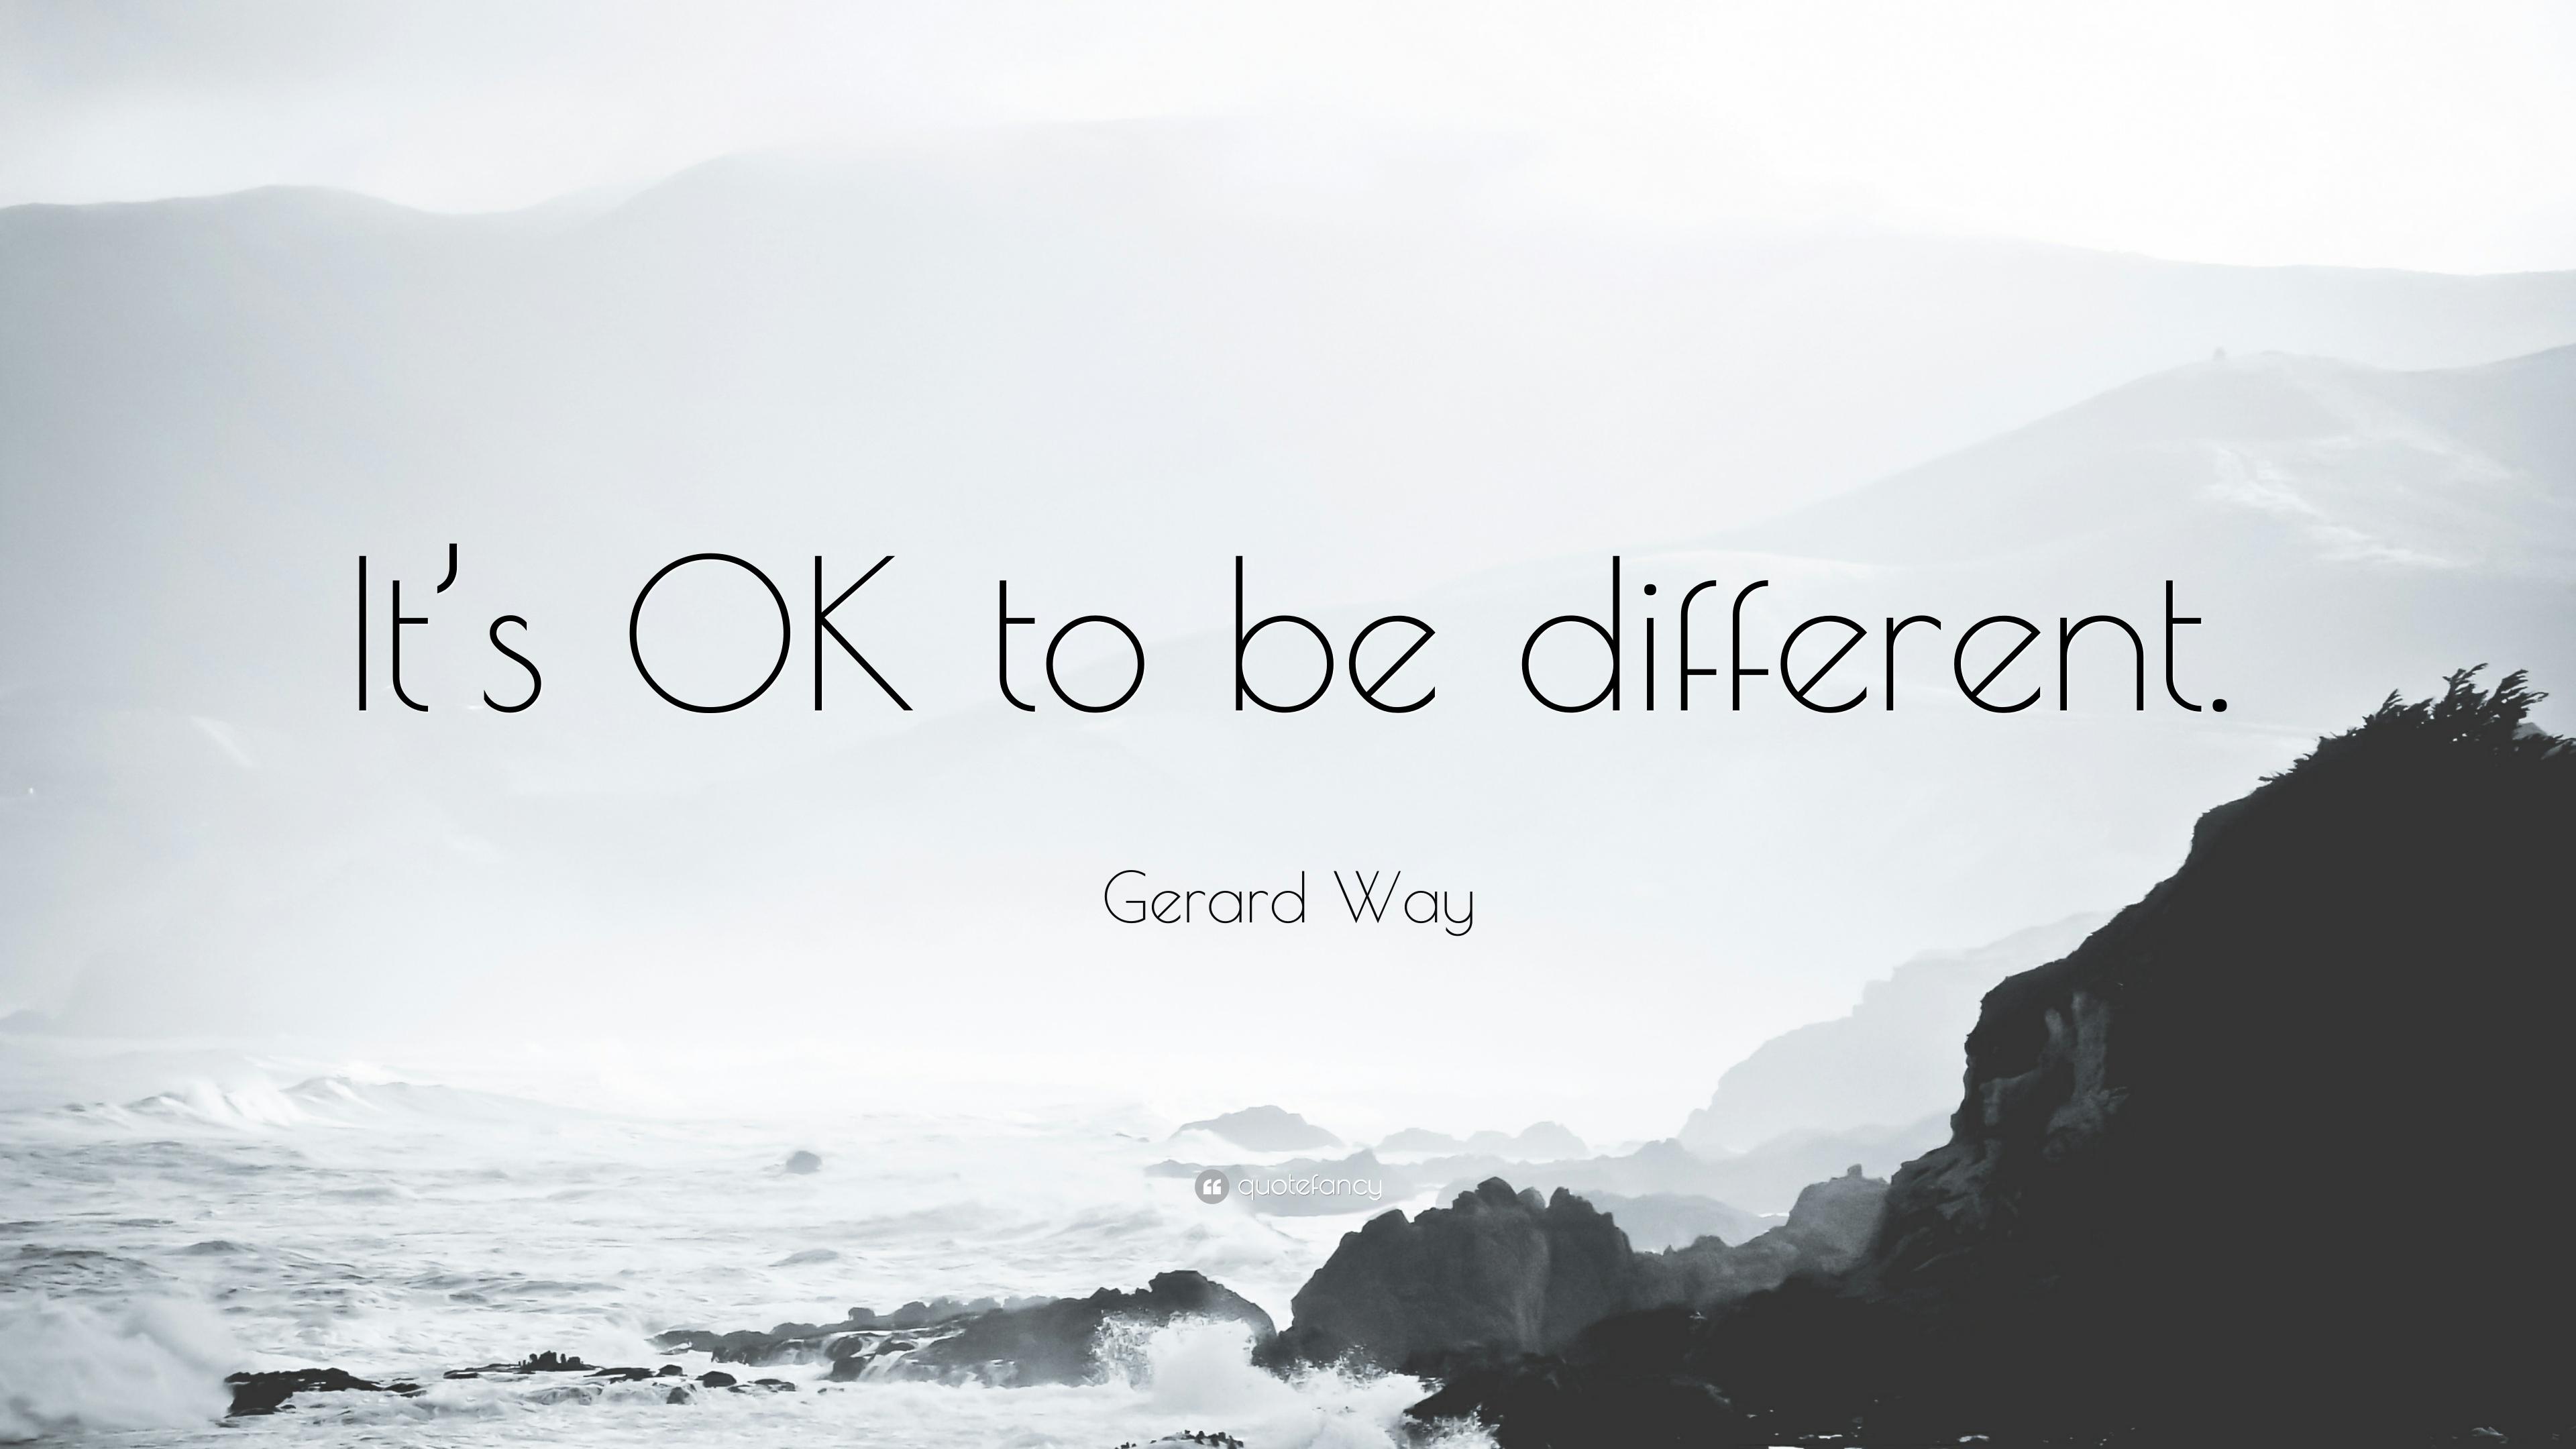 Gerard Way Quote: “It's OK to be different.” 12 wallpaper